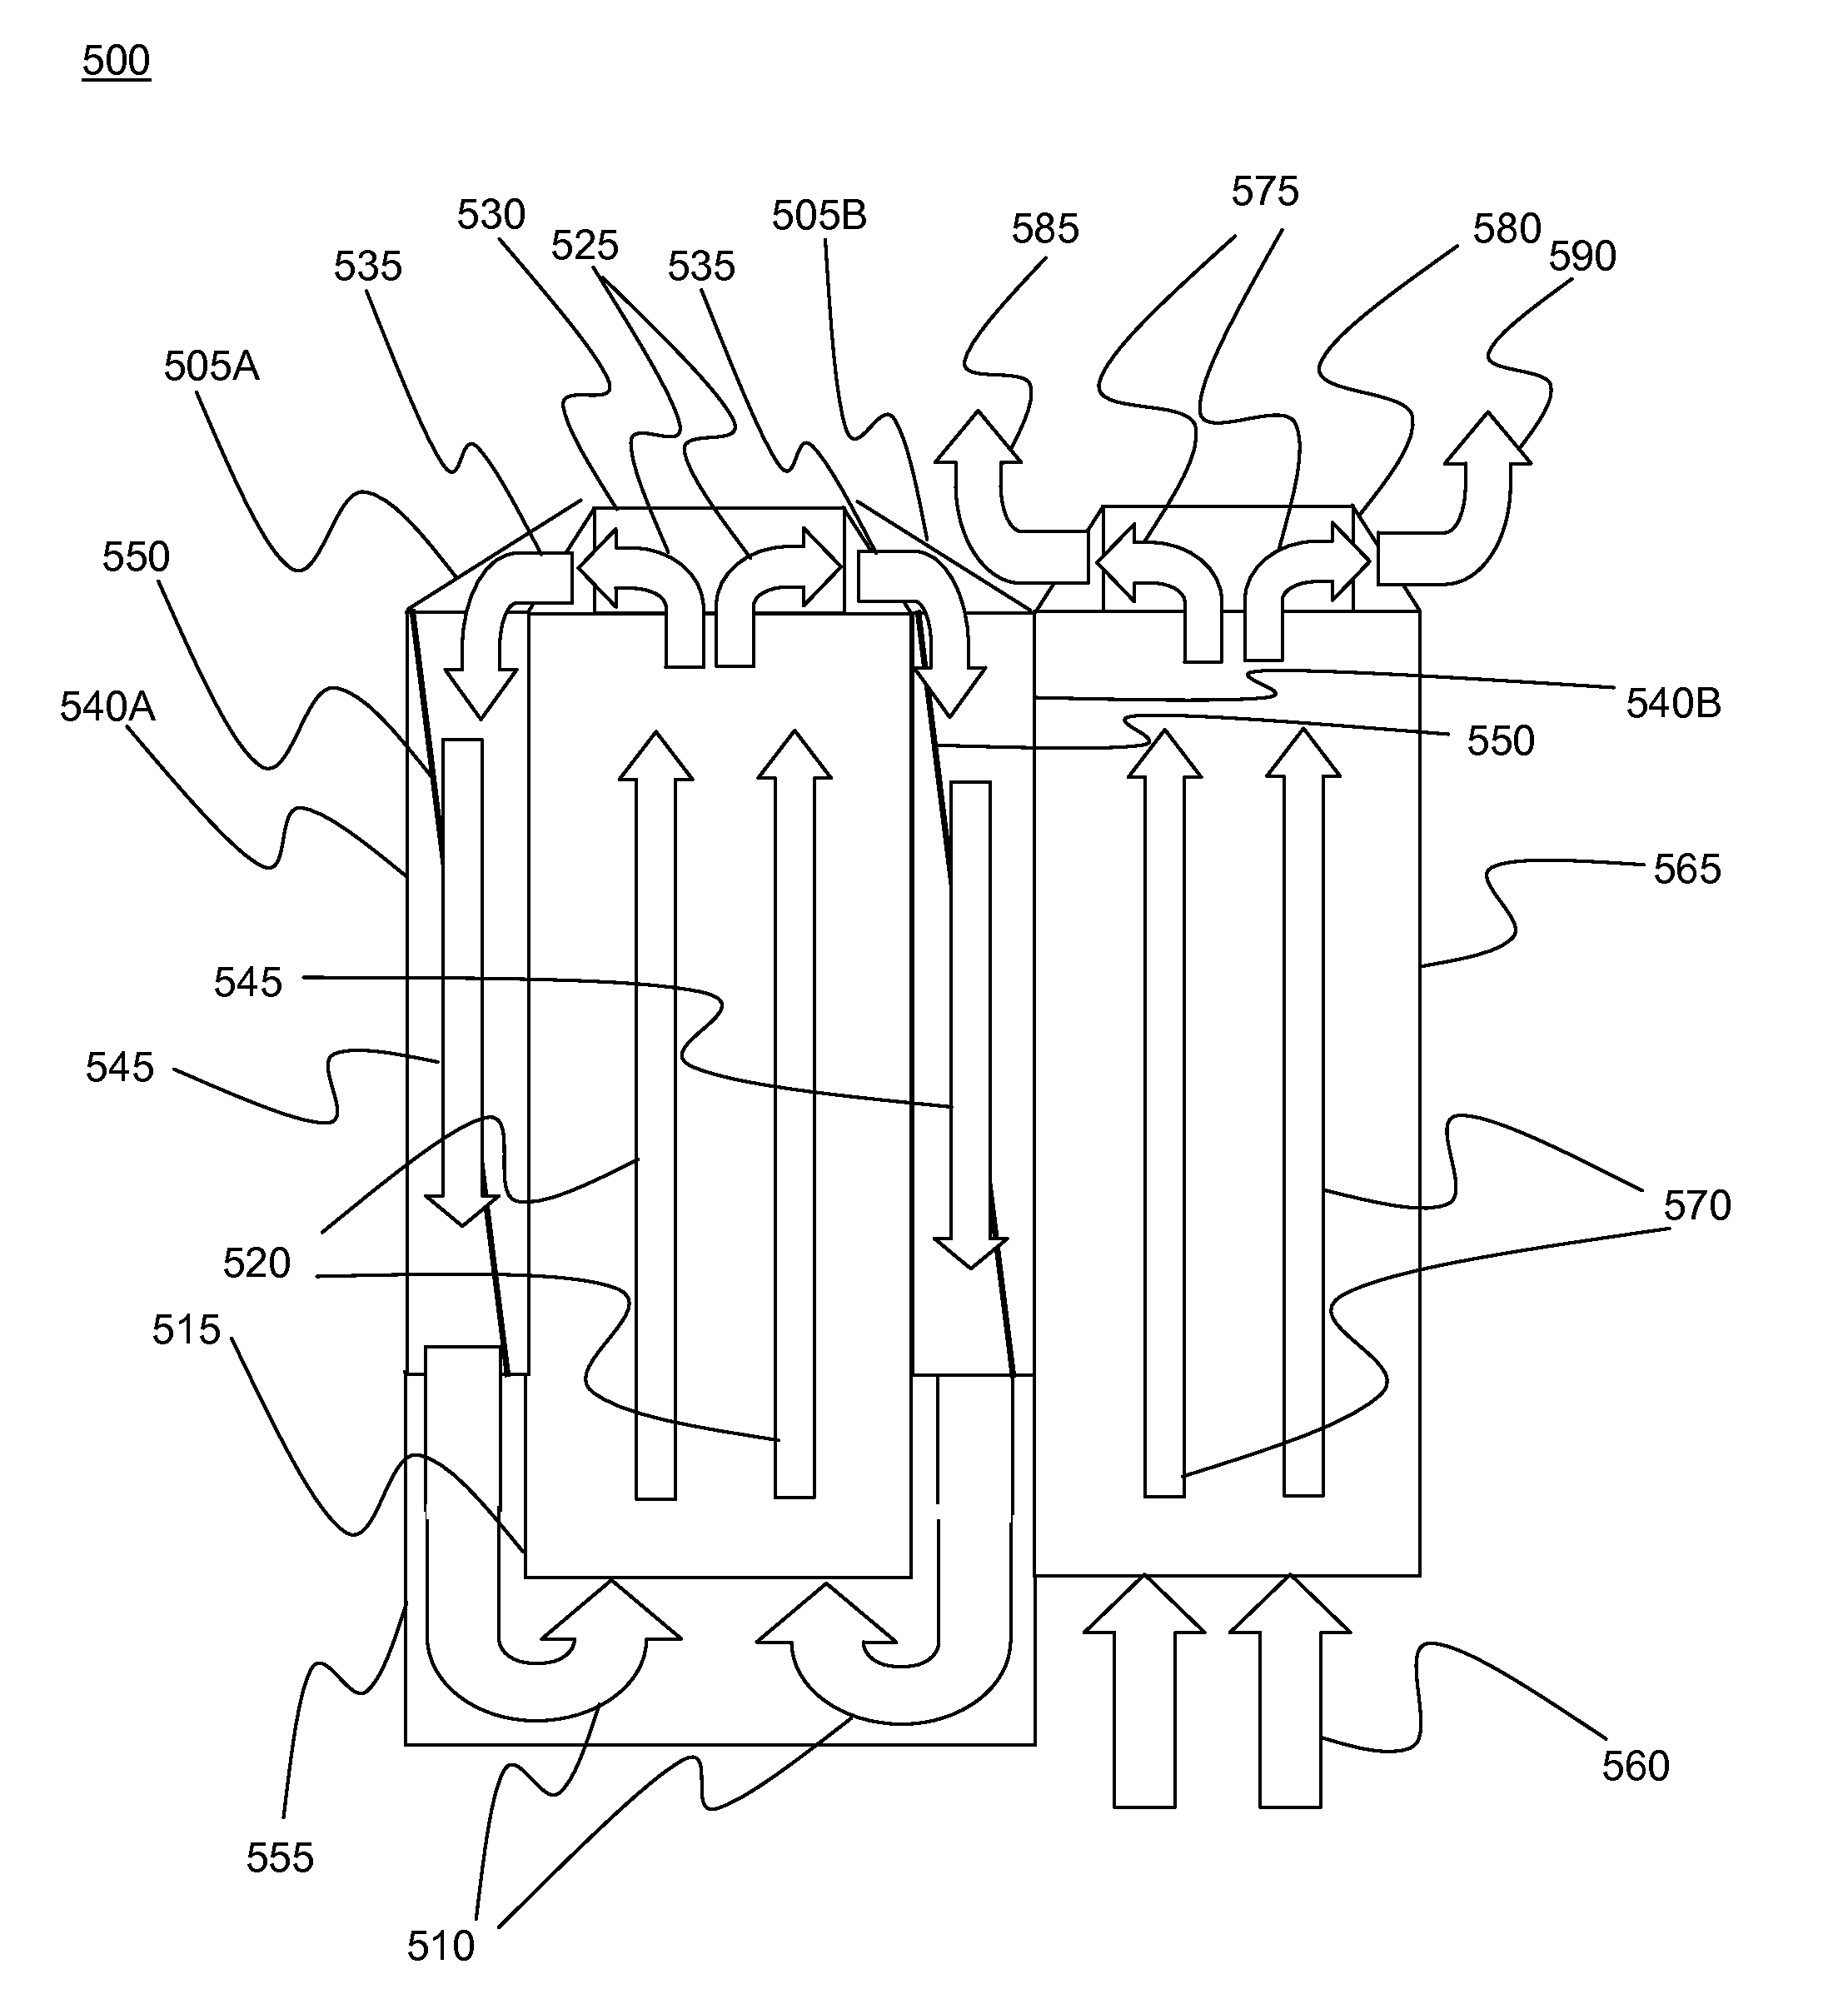 Sidecar in-row cooling apparatus and method for equipment within an enclosure